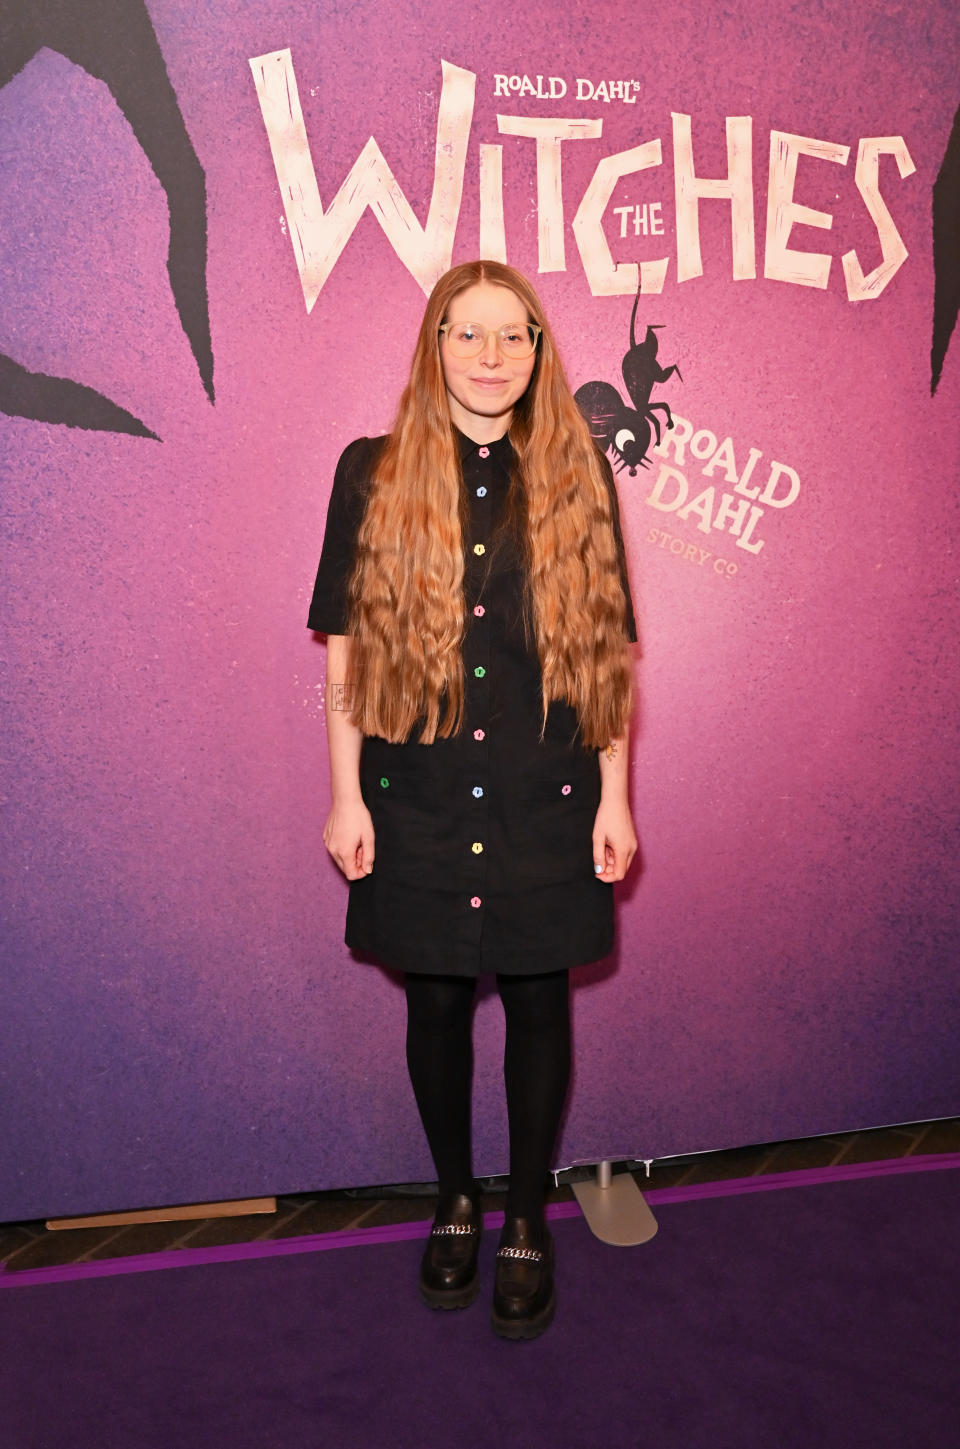 Jessie stands before 'The Witches' backdrop wearing a dress and platform shoes at a premiere